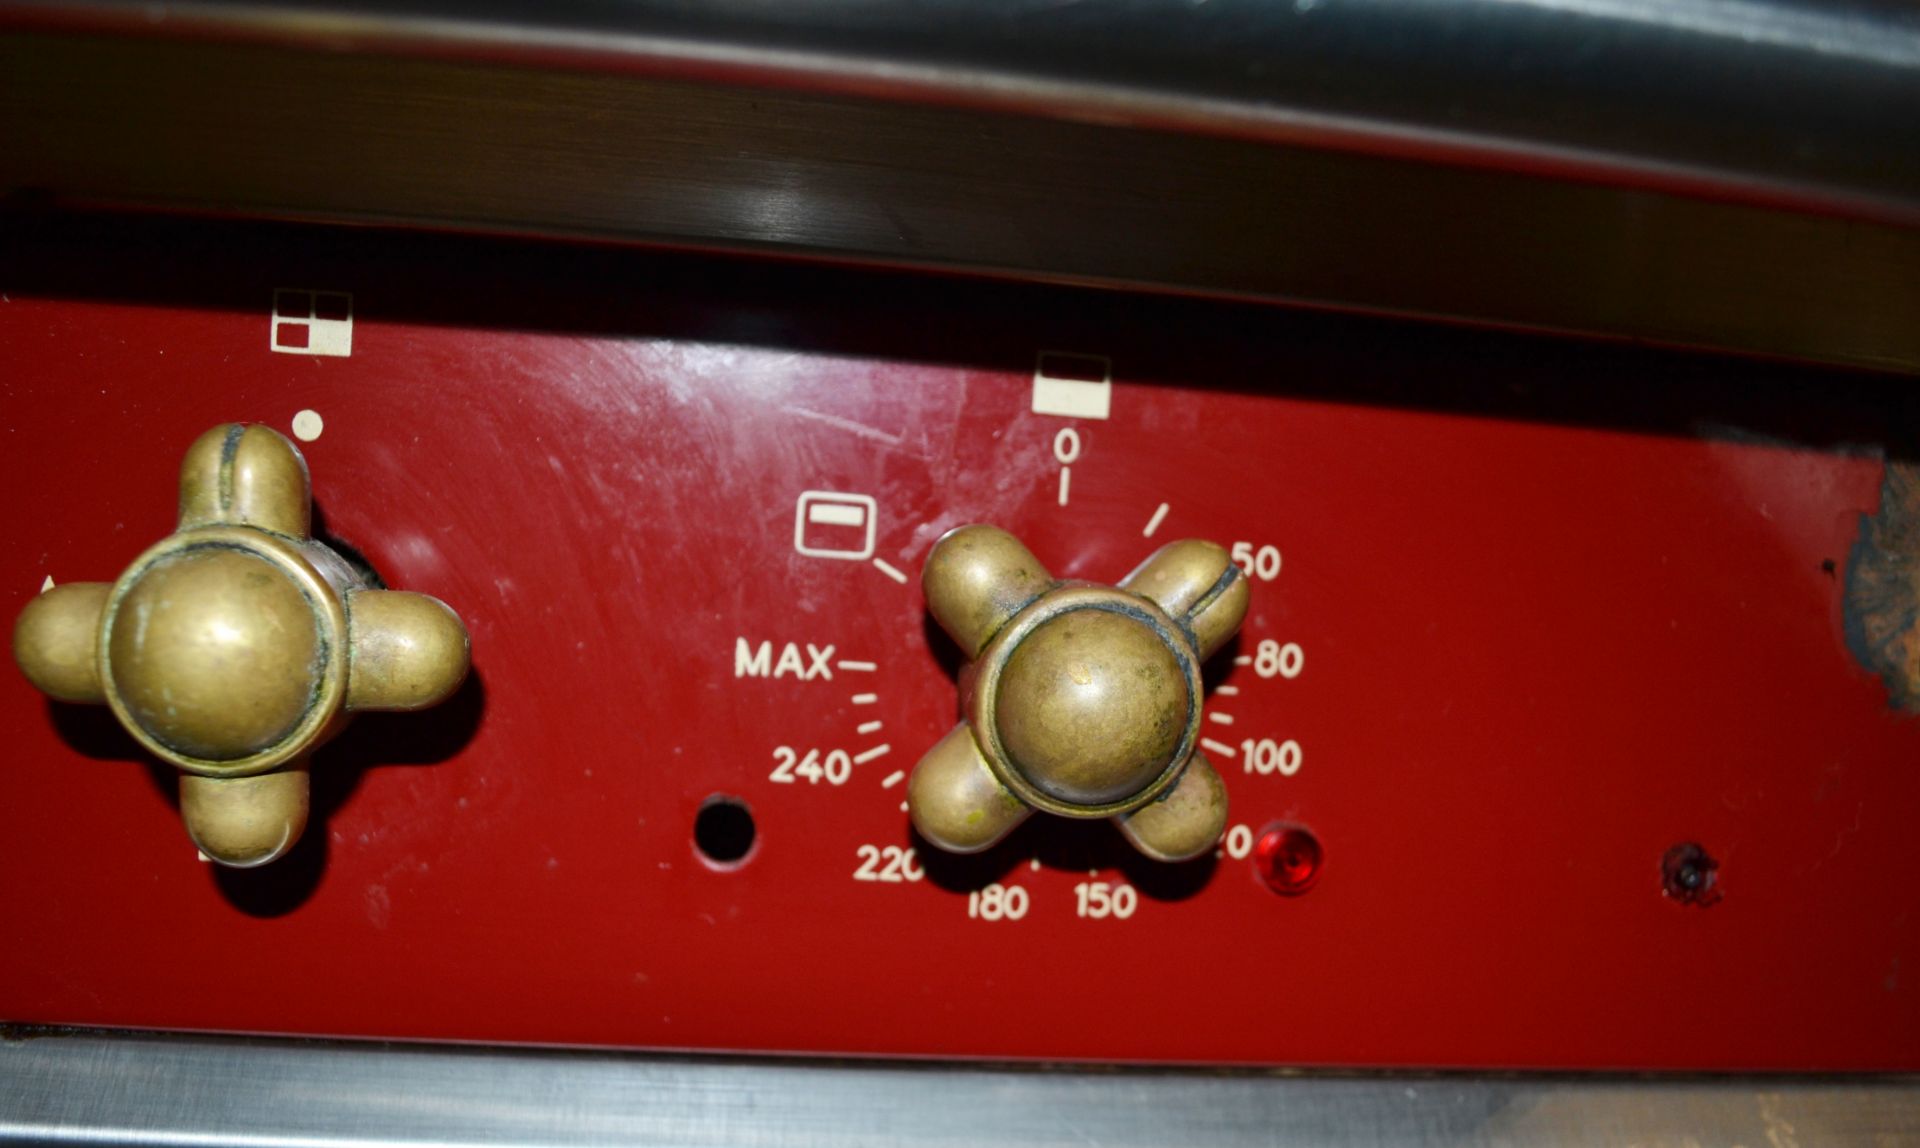 1 x Lacanche Cluny Classic 100 (Cote d'Or) Range Cooker Double Oven in Red - Dual Fuel - Used - - Image 17 of 21